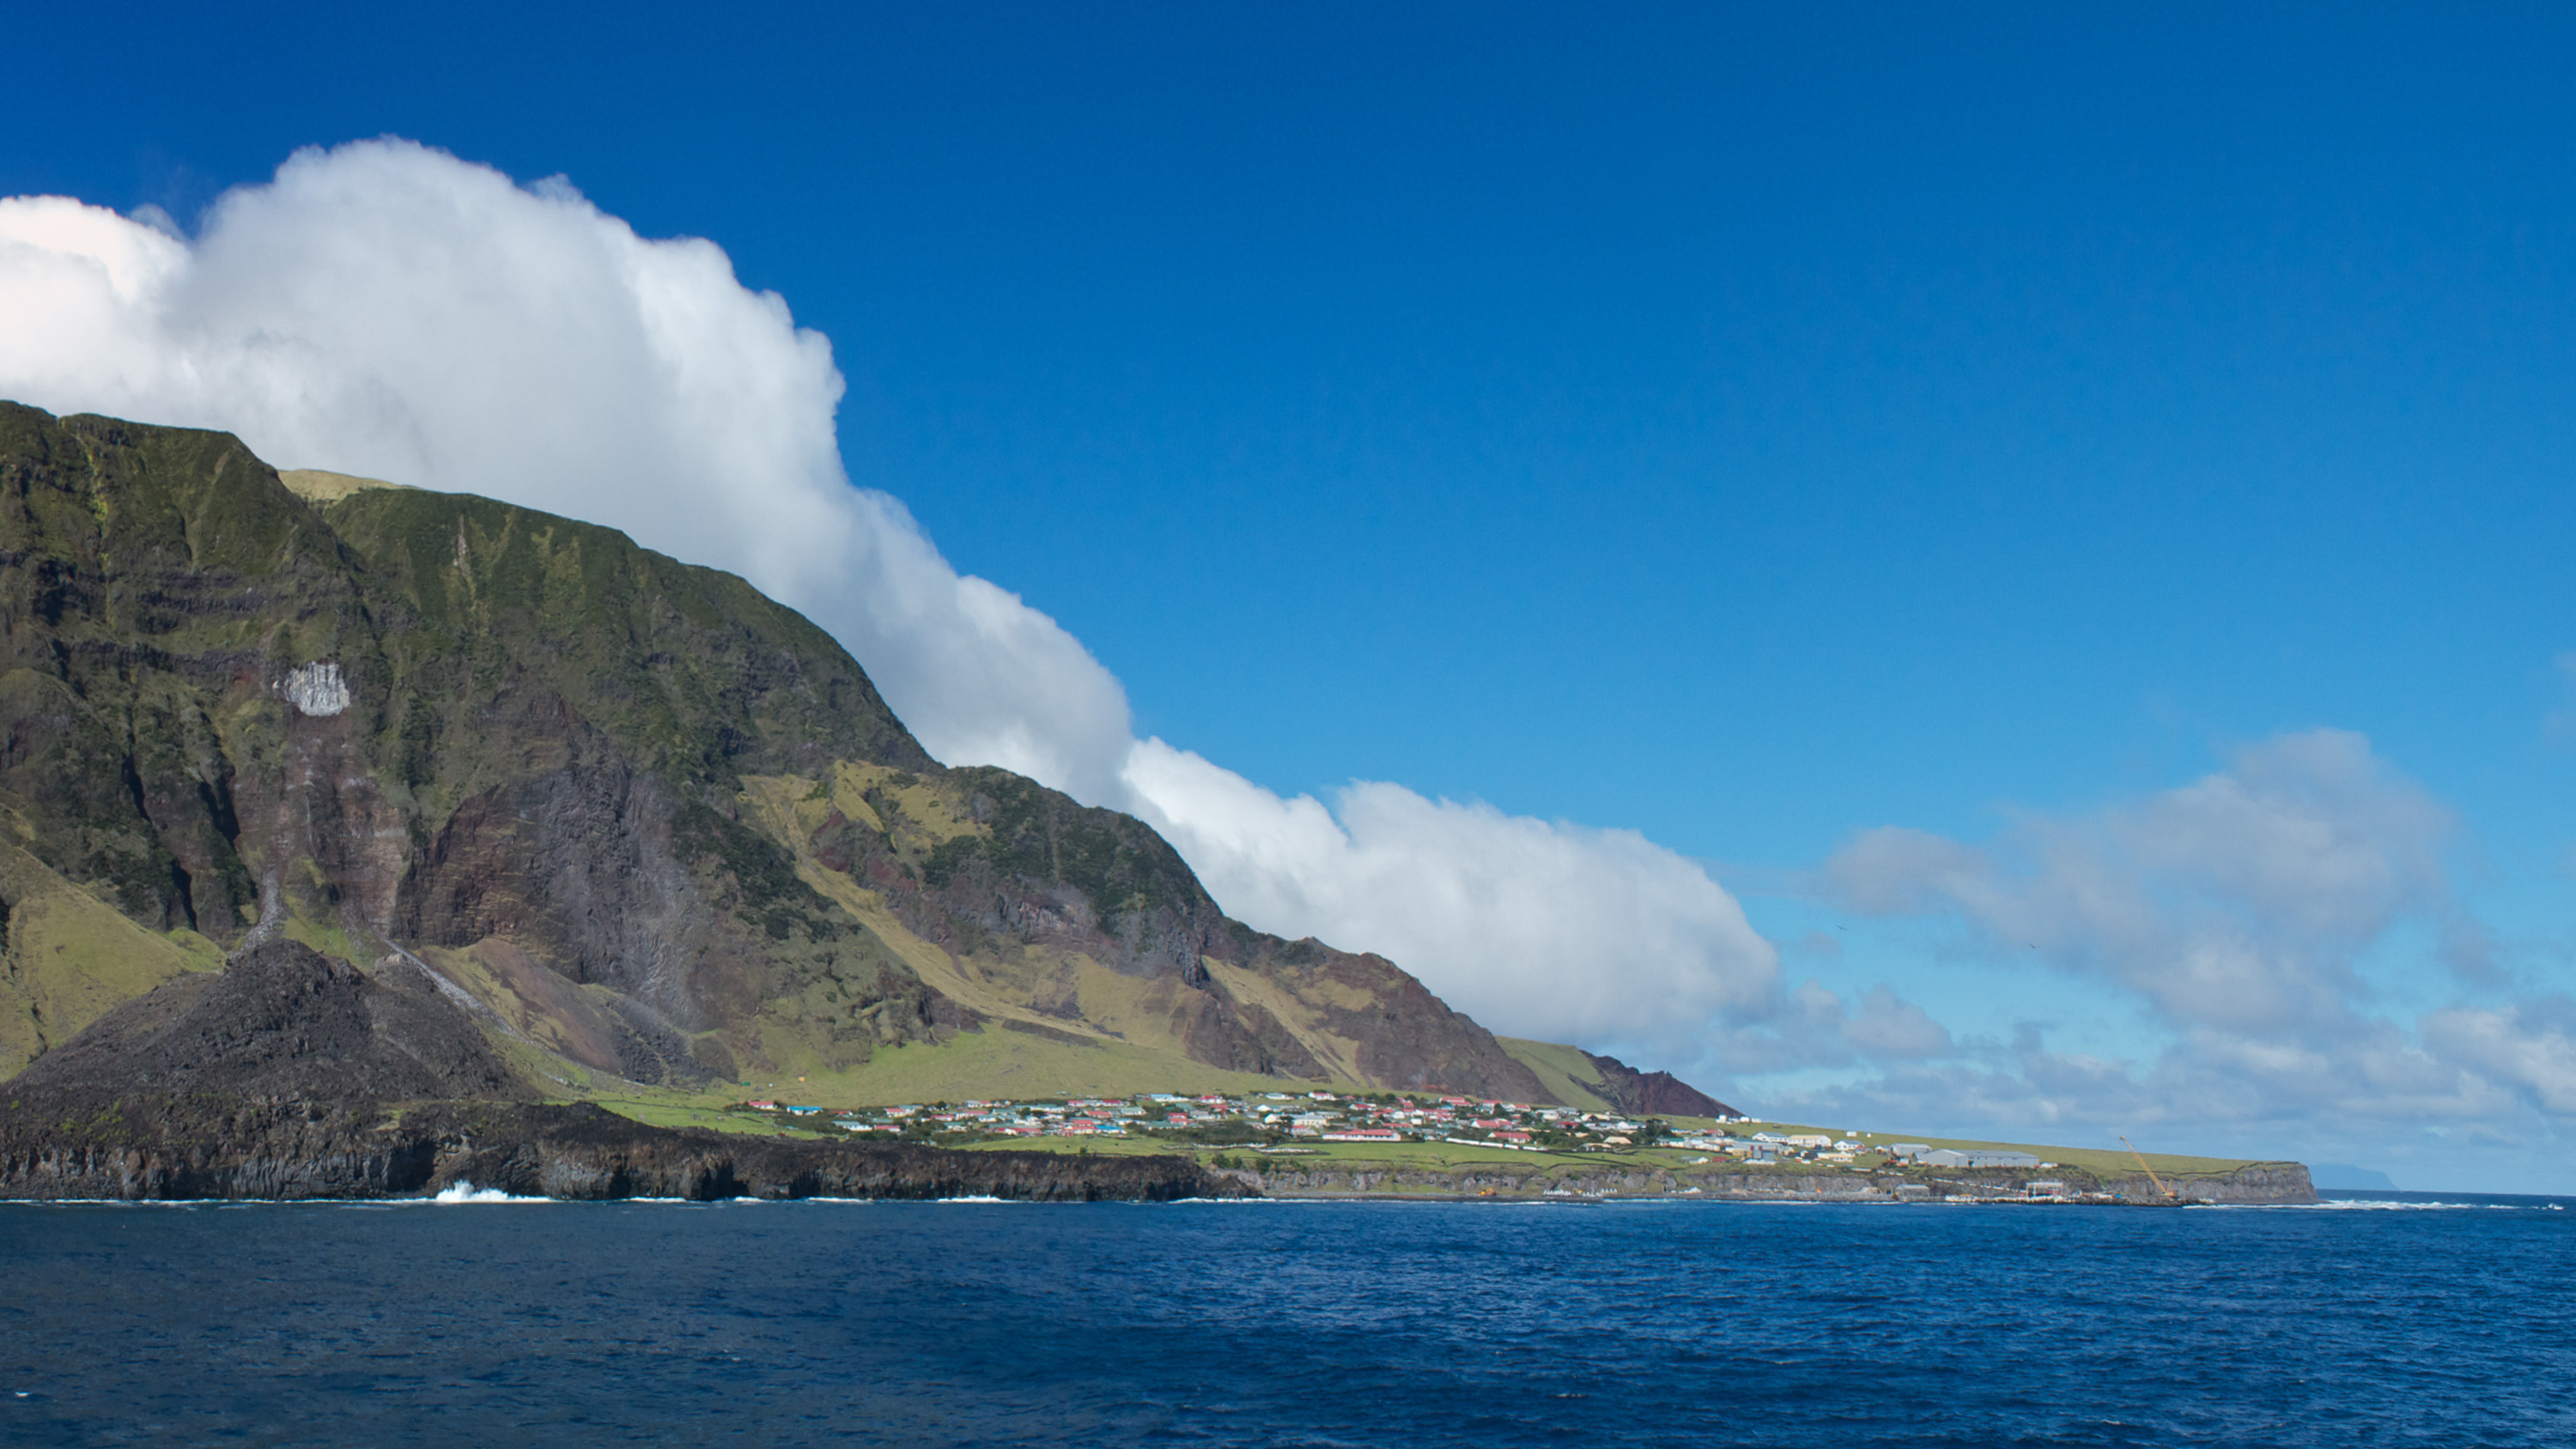 <p><strong>Estimated cost:</strong> $1,294</p> <p>Although Tristan da Cunha is one of the most isolated islands in the world, the warm hospitality of its 300 or so English-speaking residents is well-known.</p> <p>Enjoy your time hiking a dormant volcano, visiting colonies of rockhopper penguins, fishing or taking a cruise to nearby wildlife preserve islands. Get to know locals one-on-one with a homestay that includes full board and laundry for $66 per day per person. Private guest houses with up to three bedrooms or remote huts are other options if you prefer more privacy.</p> <p><strong>How to get there:</strong> Reaching Tristan da Cunha is more complex than flying to Cape Town, South Africa, and setting out on the six-day boat journey to the island. You'll need approval from the Island Council, which looks at your past criminal history, use of habit-forming substances and even physical health.</p> <p><strong><em>Learn: <a href="https://www.gobankingrates.com/investing/real-estate/affordable-up-and-coming-us-locations-to-buy-vacation-property-in-2023/?utm_term=related_link_8&utm_campaign=1224529&utm_source=msn.com&utm_content=10&utm_medium=rss" rel="">5 Affordable Up-and-Coming US Locations To Buy Vacation Property in 2023</a></em></strong></p>